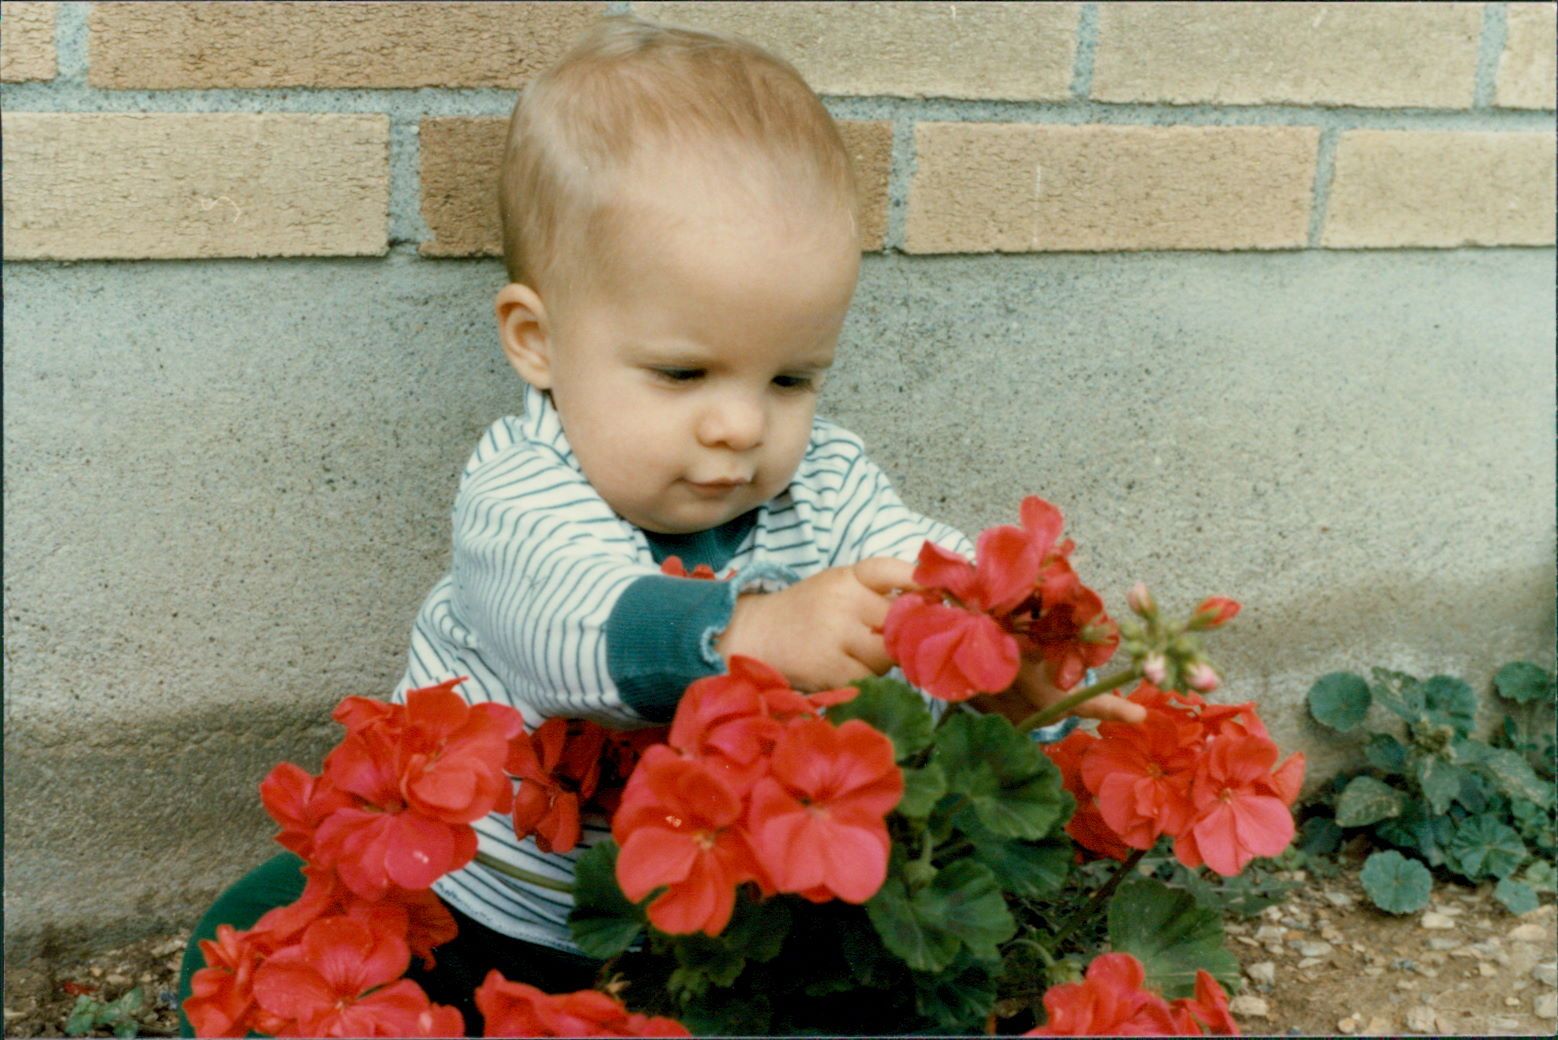 A young baby sitting in a flower bed, playing with the flowers